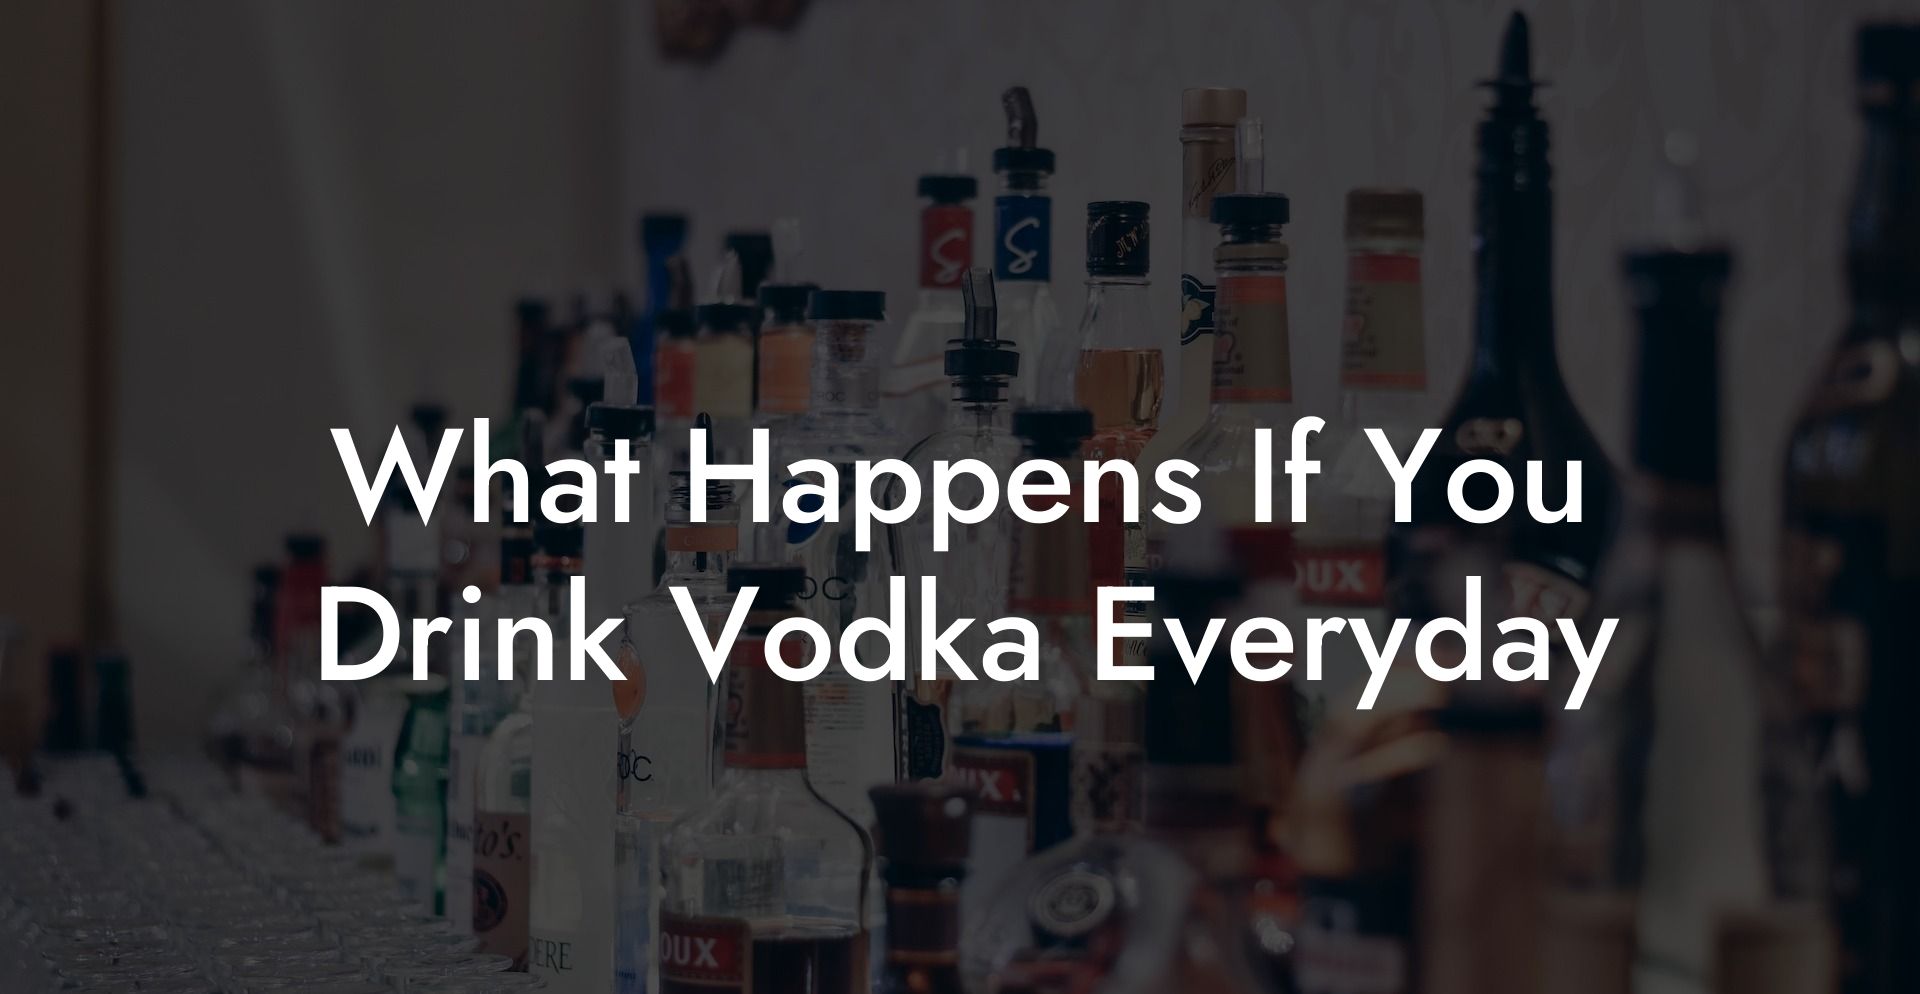 What Happens If You Drink Vodka Everyday